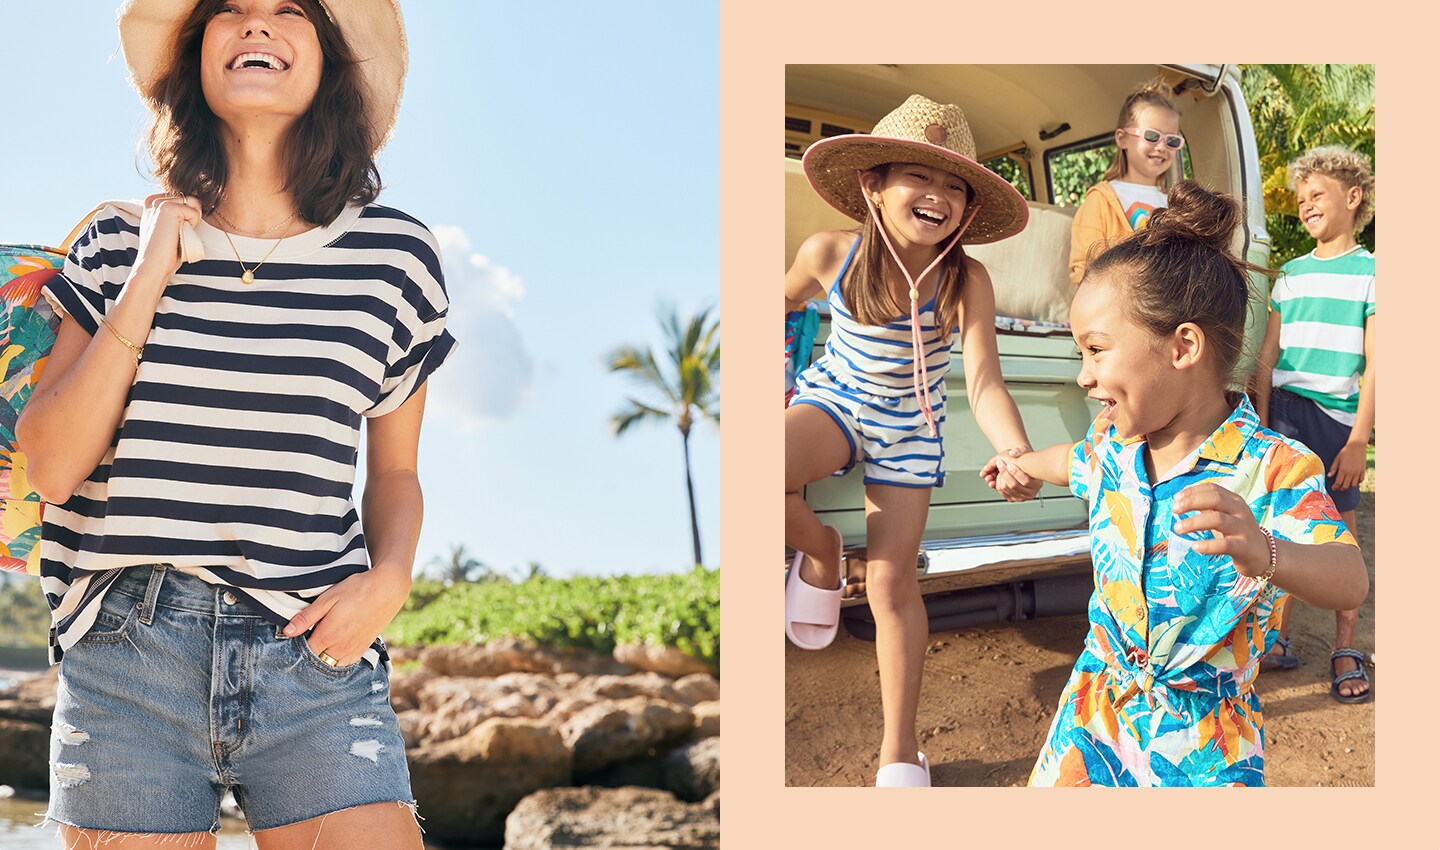 Image displays four kids wearing colorful patterned shorts with matching tops and a female model dressed in a denim cutoff short and loose stripped t-shirt.